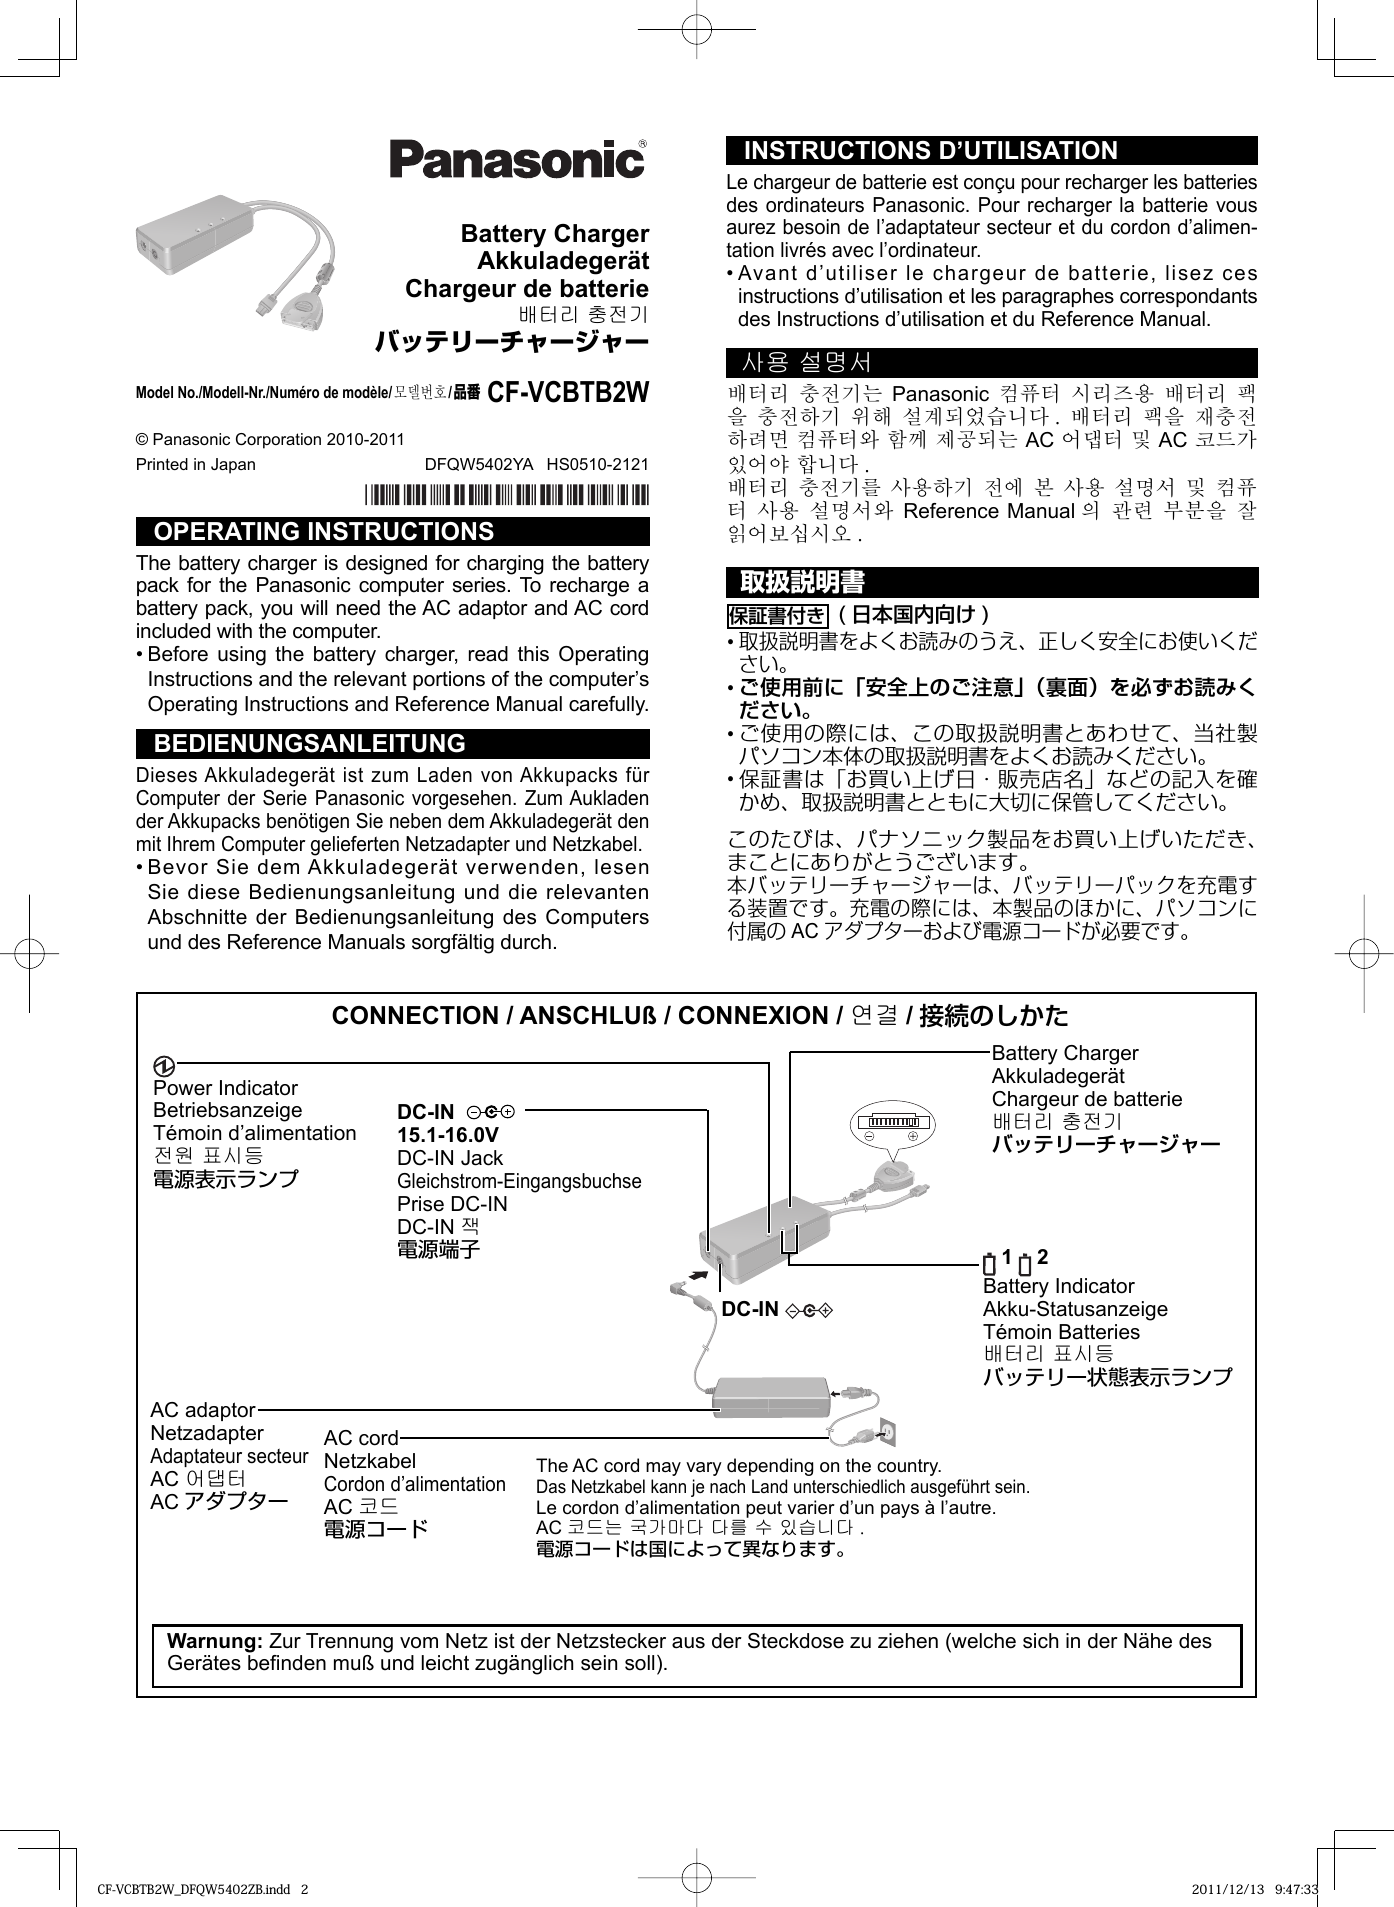 Page 1 of 8 - Panasonic CF-VCBxxx (Battery Charger) Operating Instructions User Manual : (English/ German/ French/ Korean/ Japanese) (Revision) Vcbtb2w-oi-dfqw5402ya-non-nonlogo-JMGFKO-p20110780